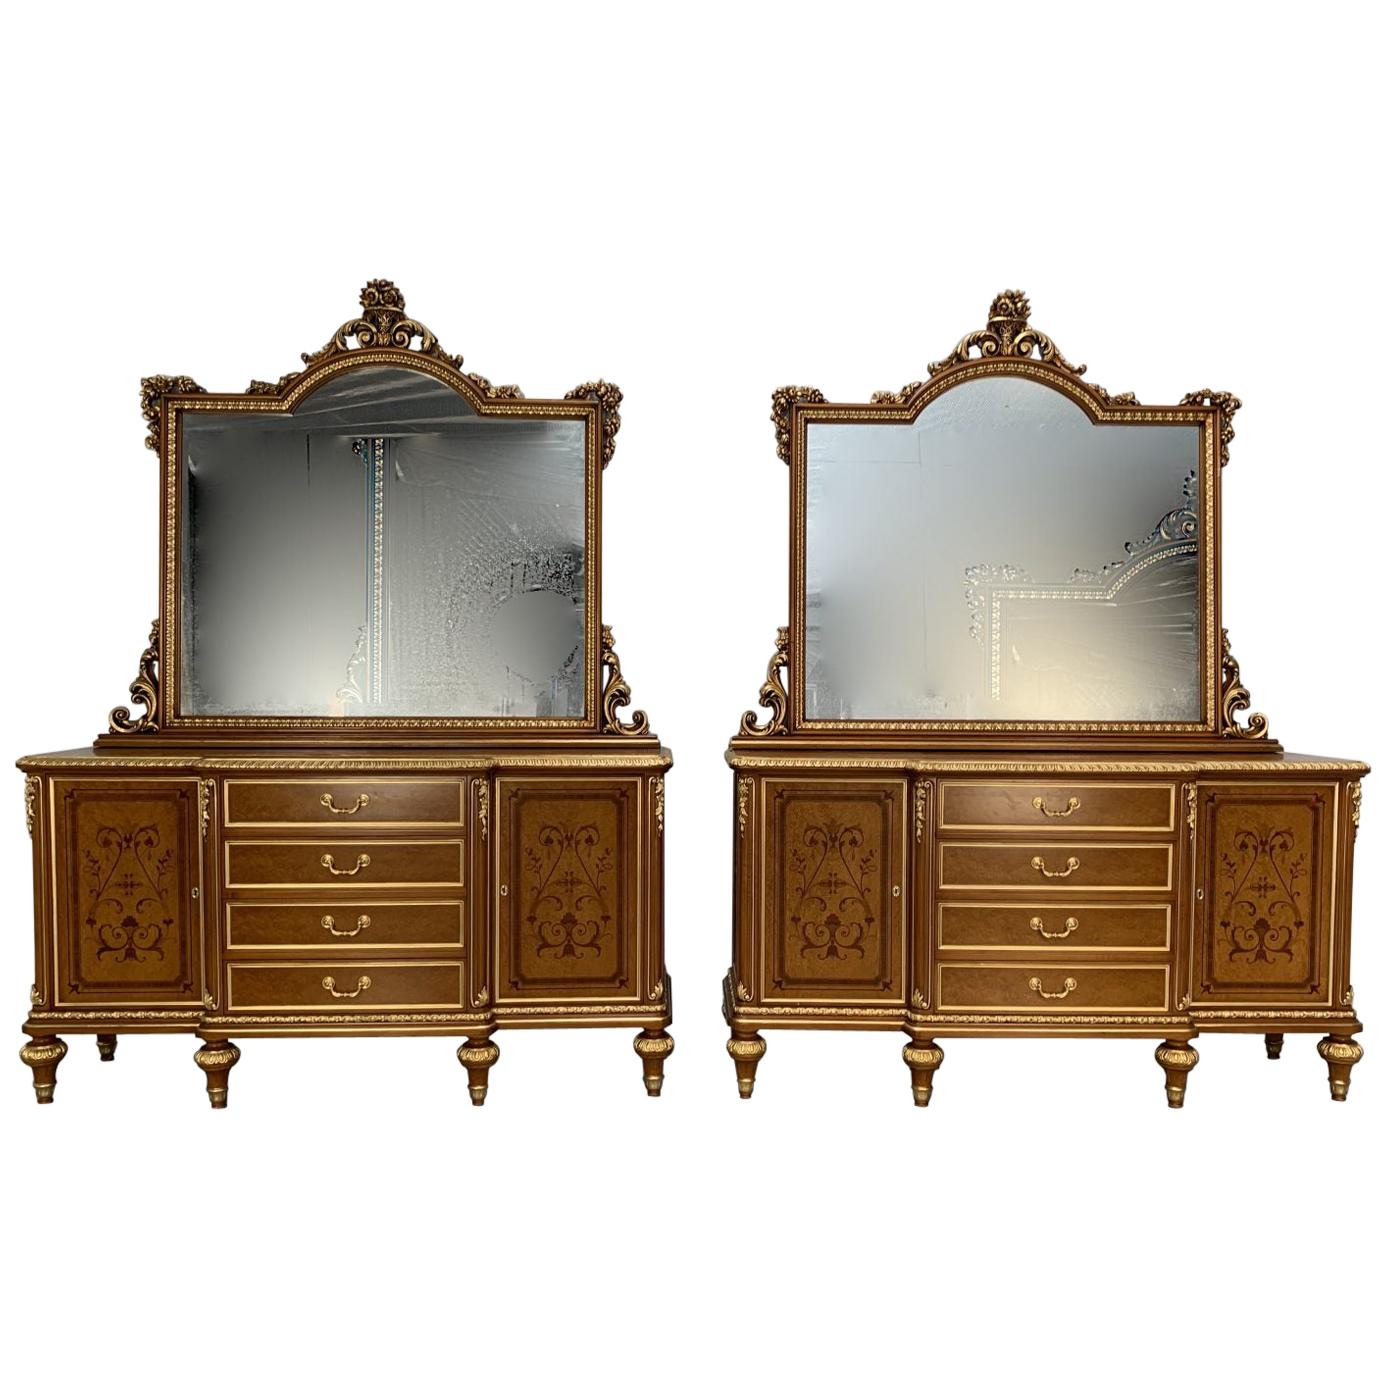 Pair of Asnaghi Inlaid Marquetry Breakfront Cabinets Commodes with Mirrors